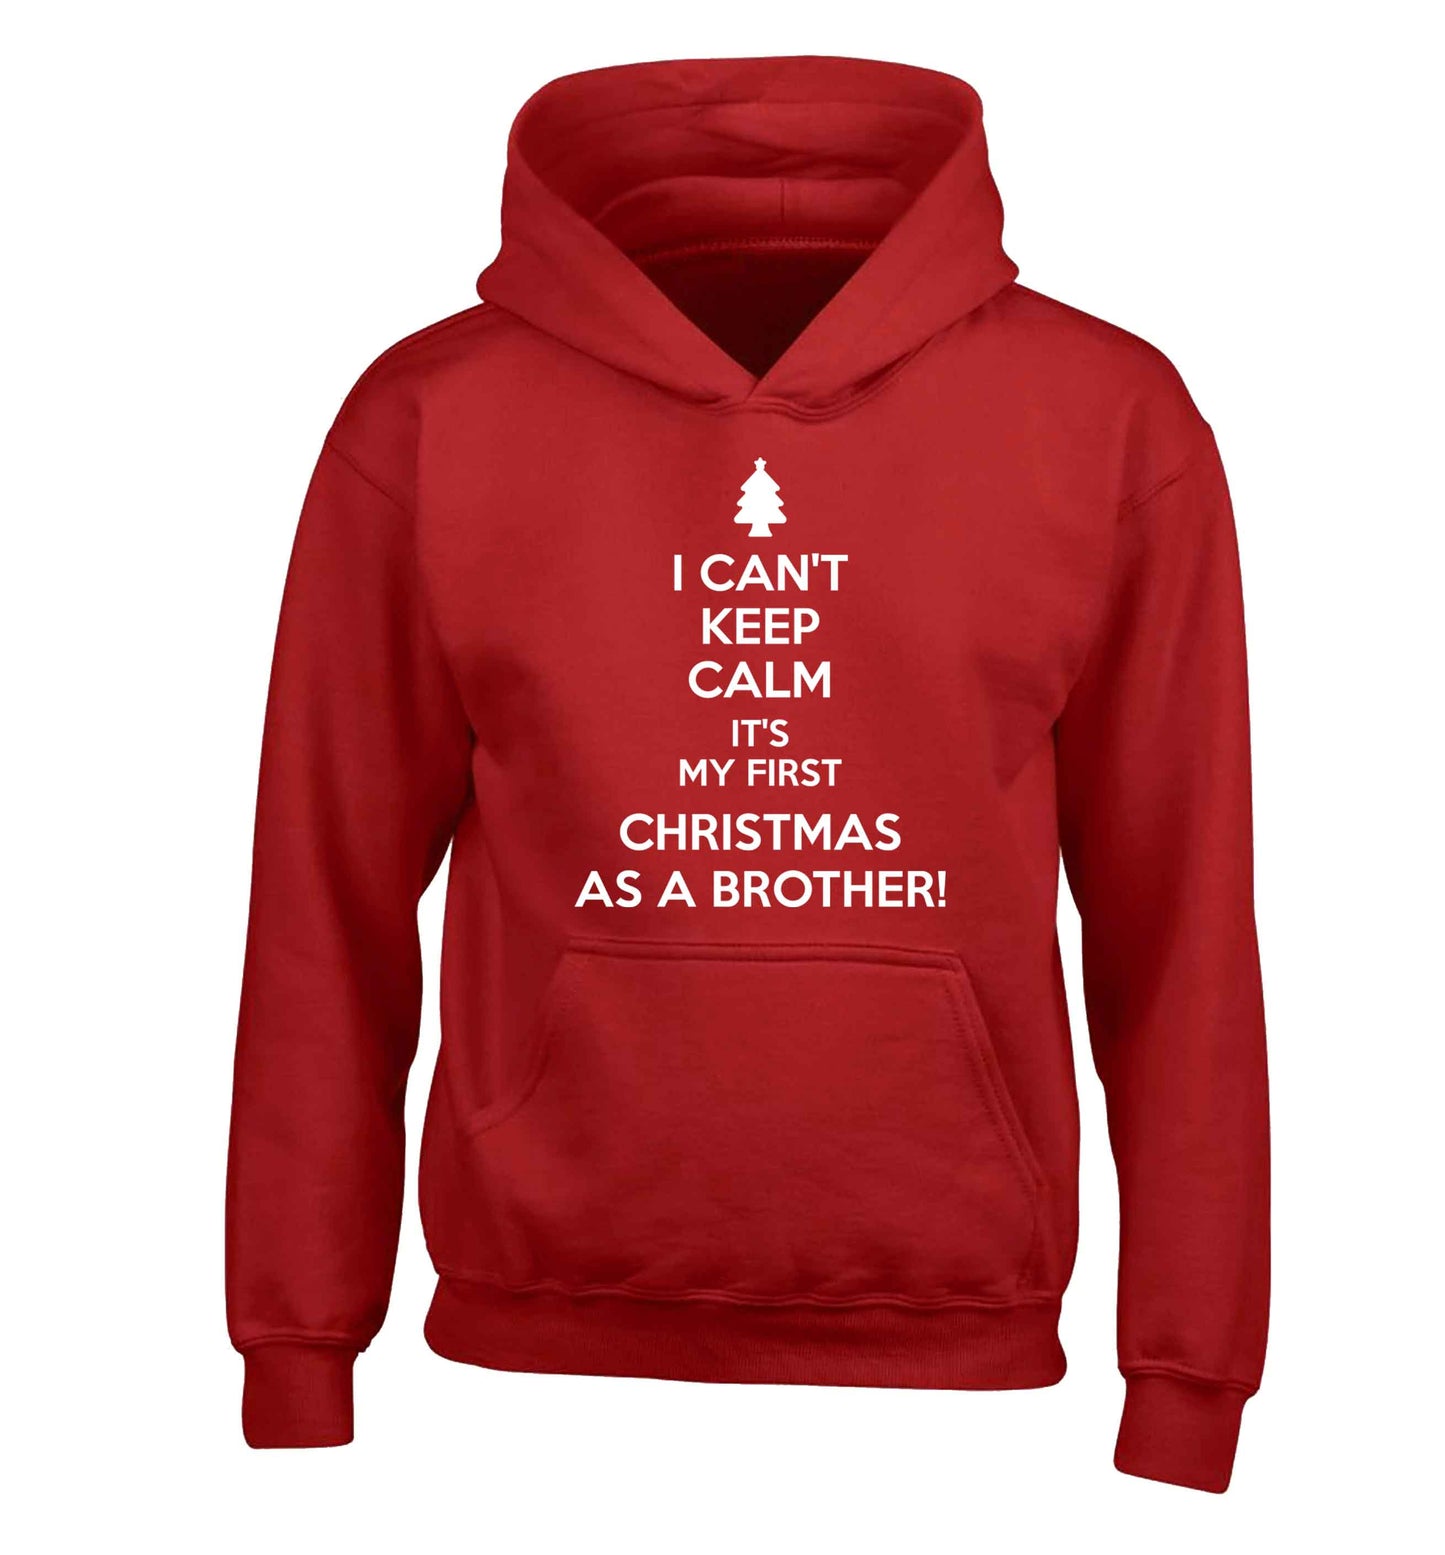 I can't keep calm it's my first Christmas as a brother! children's red hoodie 12-13 Years